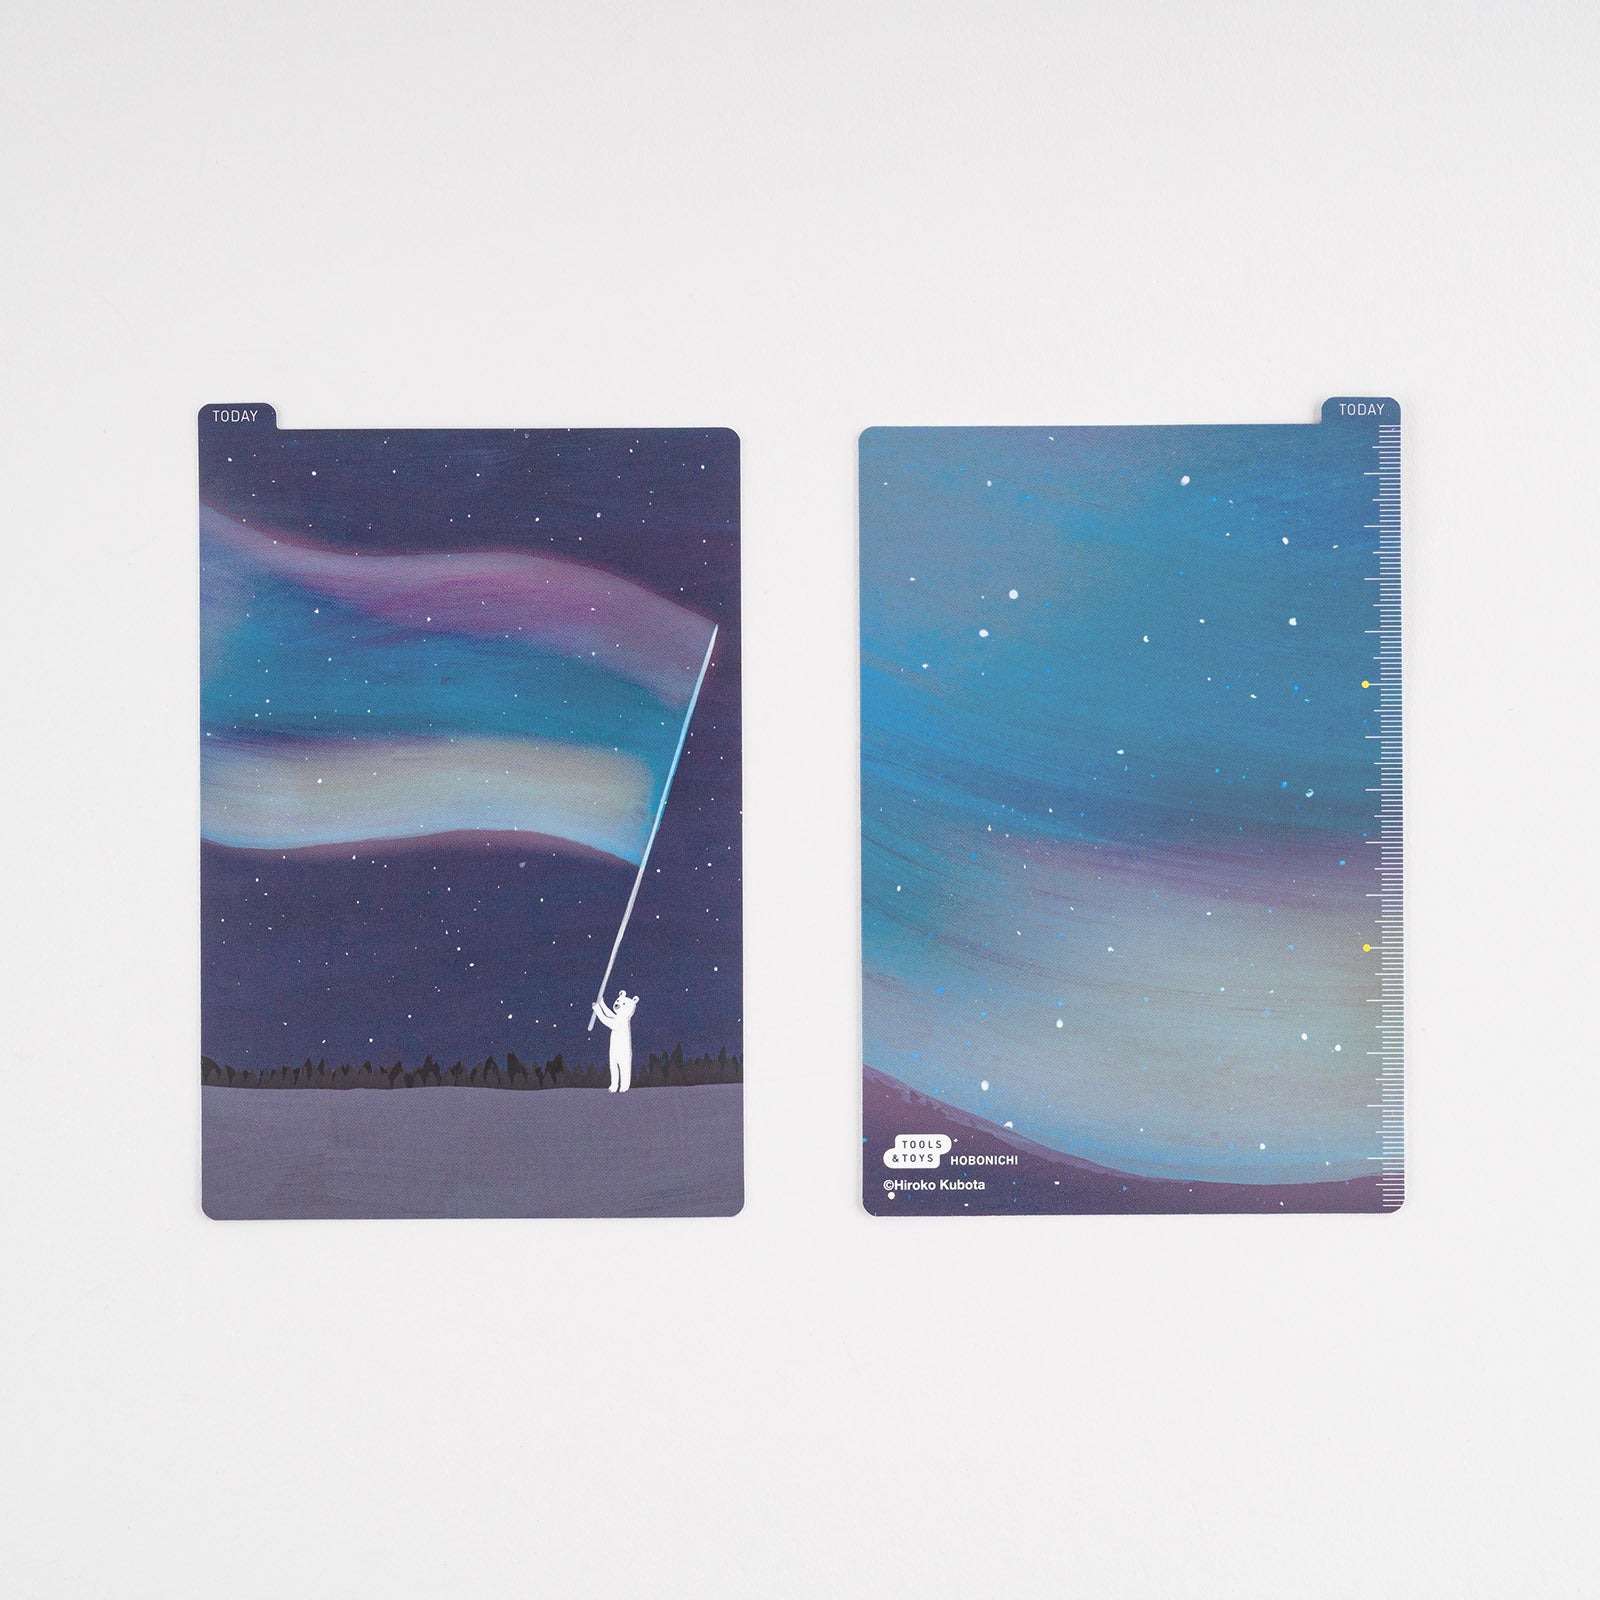 Hobonichi Hiroko Kubota: Pencil Board for A6 Size (Aurora Duty) This pencil board features artwork by Hiroko Kubota.  The Hobonichi pencil boards are designed to use underneath the page you are writing on to keep your writing experience even smoother.